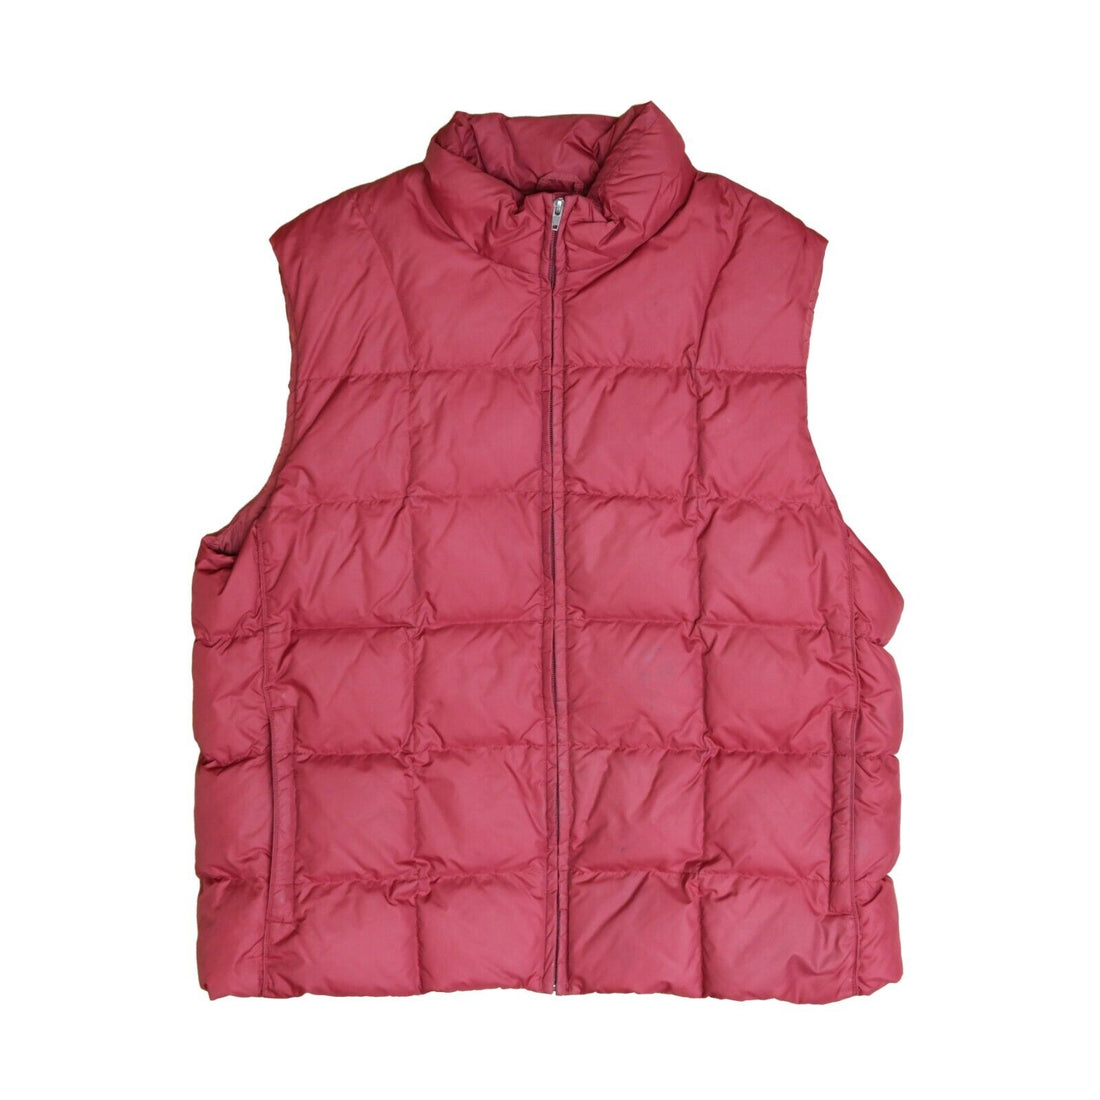 Vintage Eddie Bauer Quilted Puffer Vest Jacket Size Large Tall Red Insulated